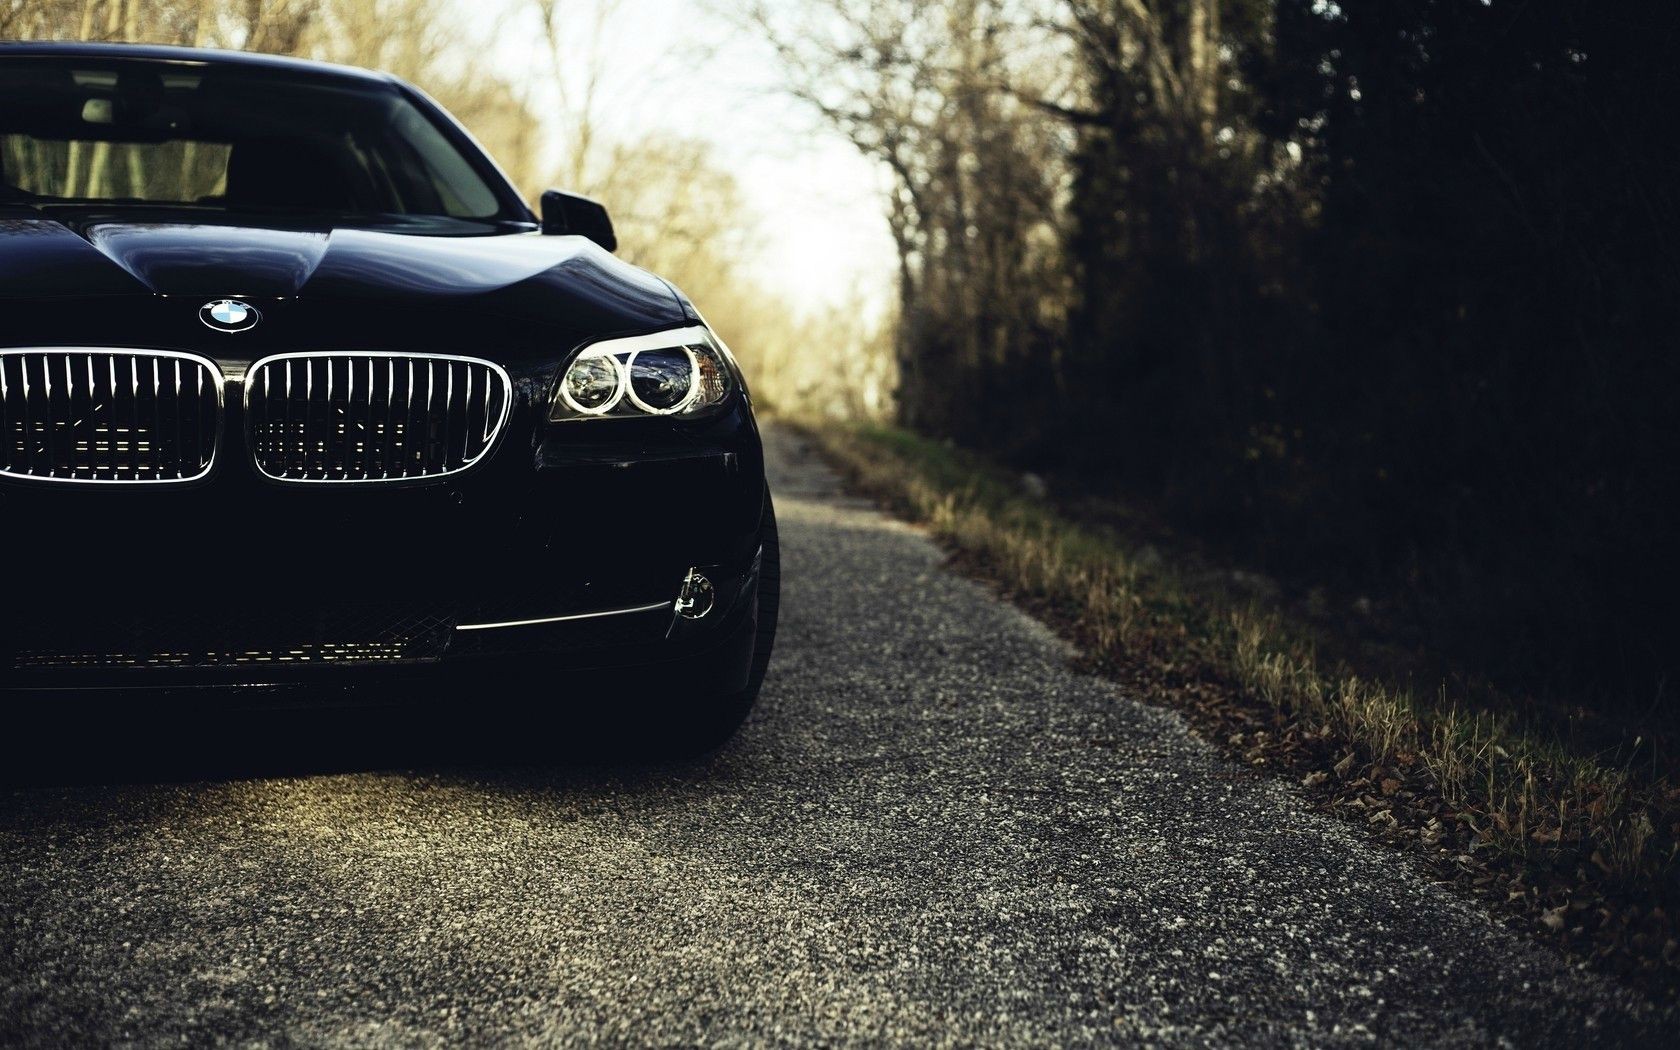 Bmw 5 Series Wallpapers